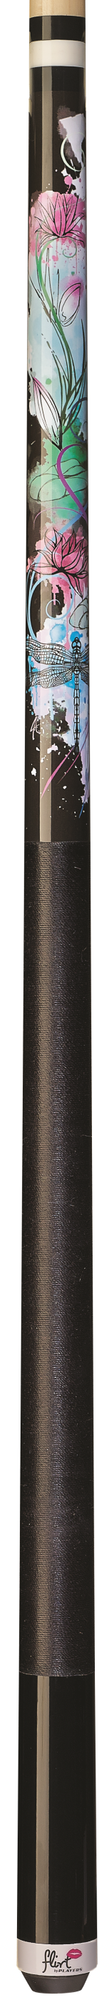 Players F-2605 Pool Cue